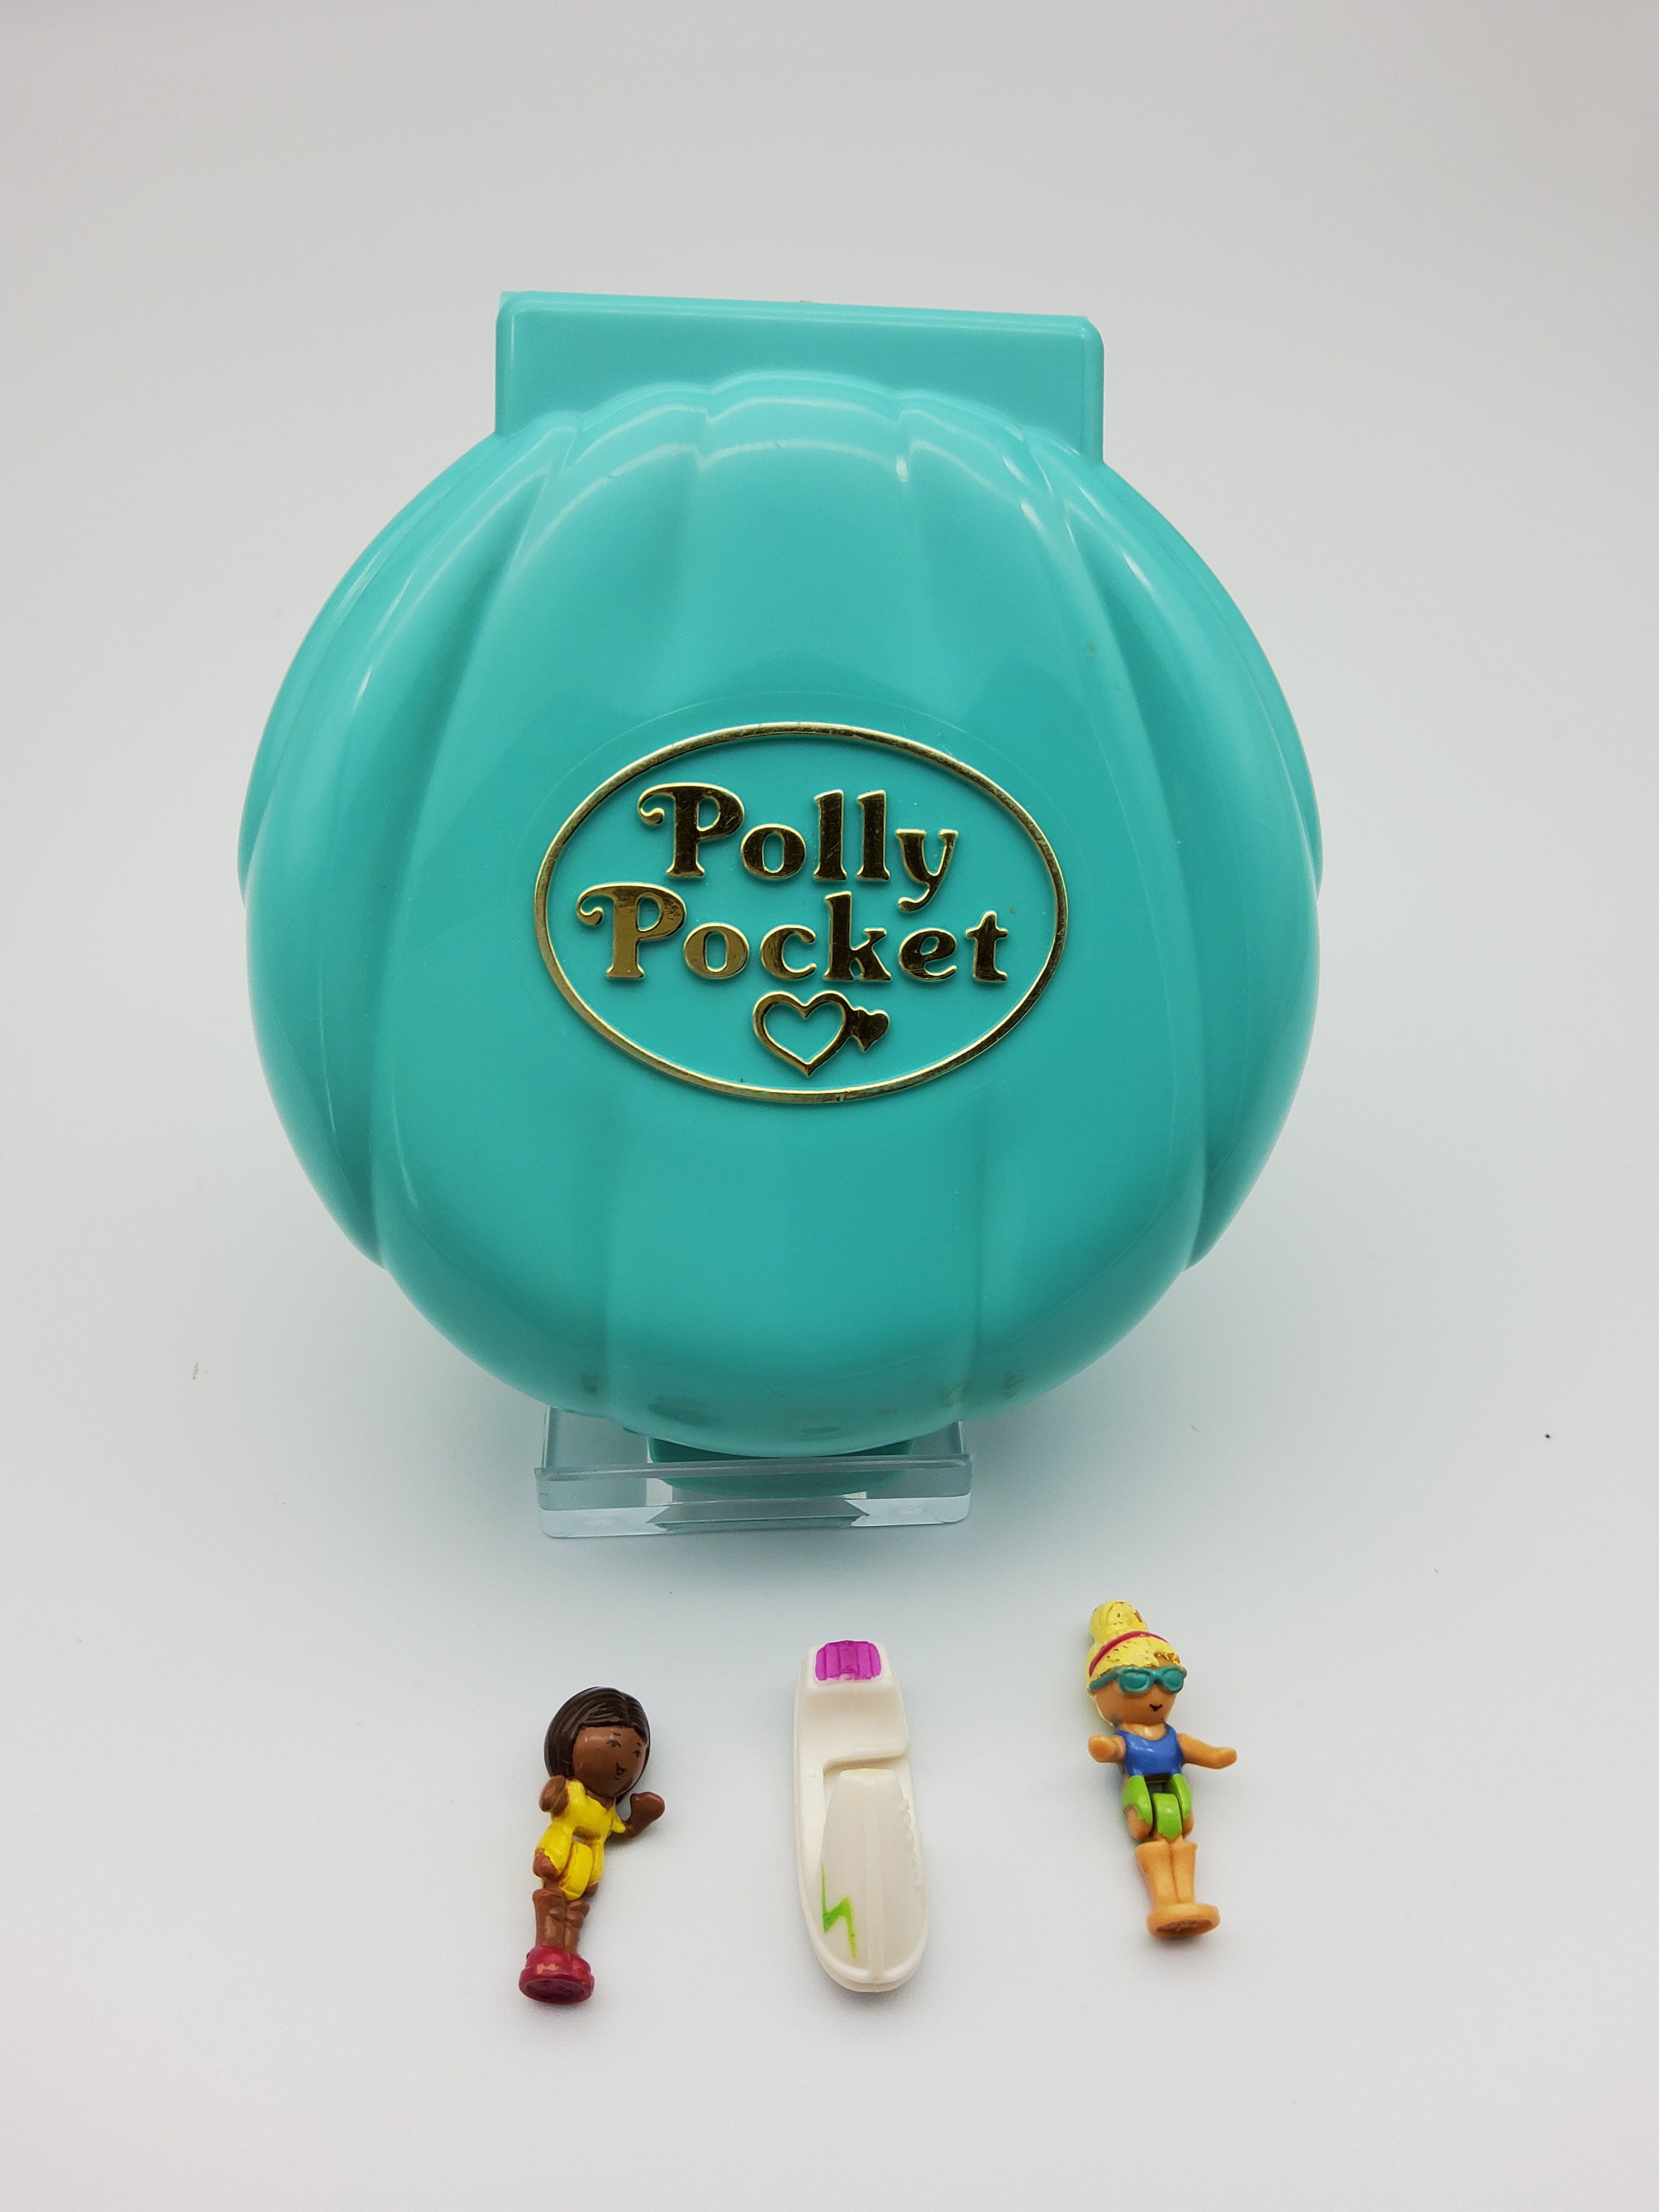 POLLY POCKET FASHION BEACH GAME 2004 NEW- OPENED BOX- SEE PICS- 2004